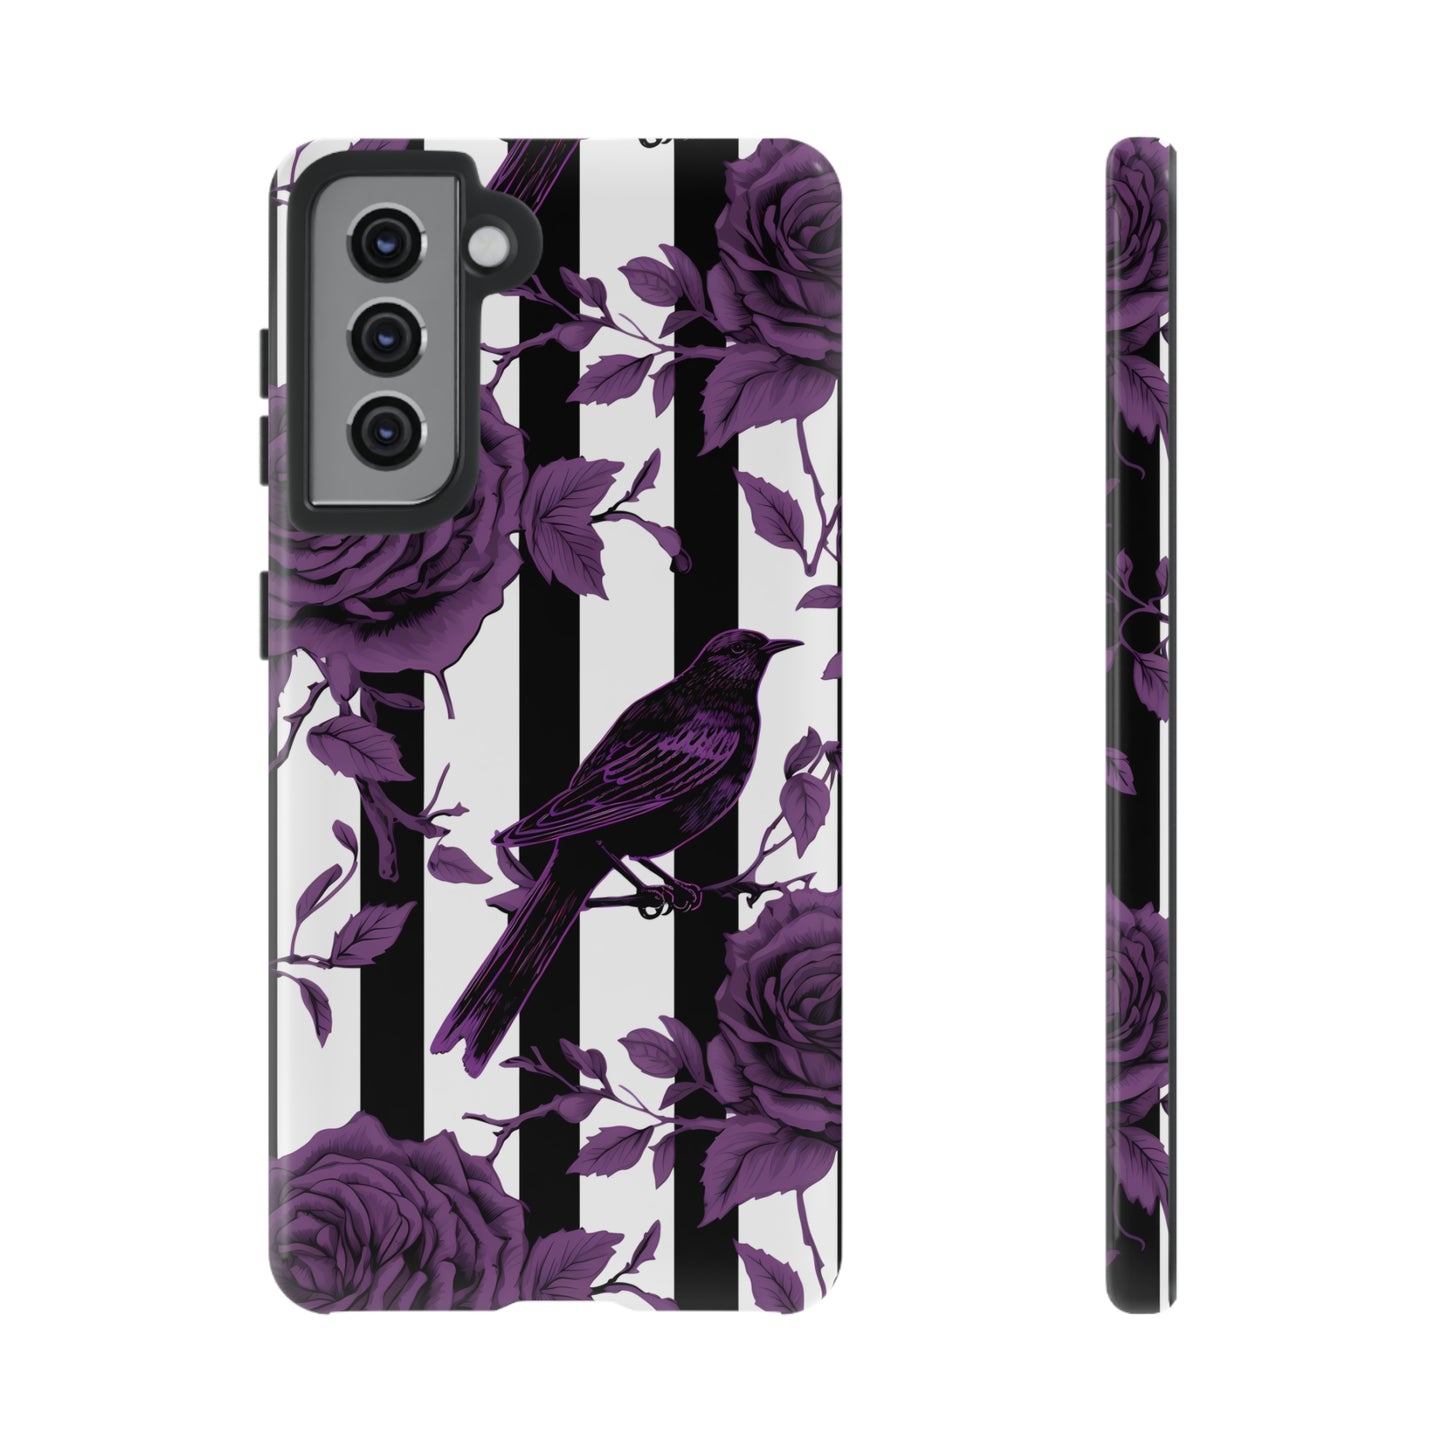 Striped Crows and Roses Tough Cases for iPhone Samsung Google PhonesPhone CaseVTZdesignsSamsung Galaxy S21GlossyAccessoriescrowsGlossy